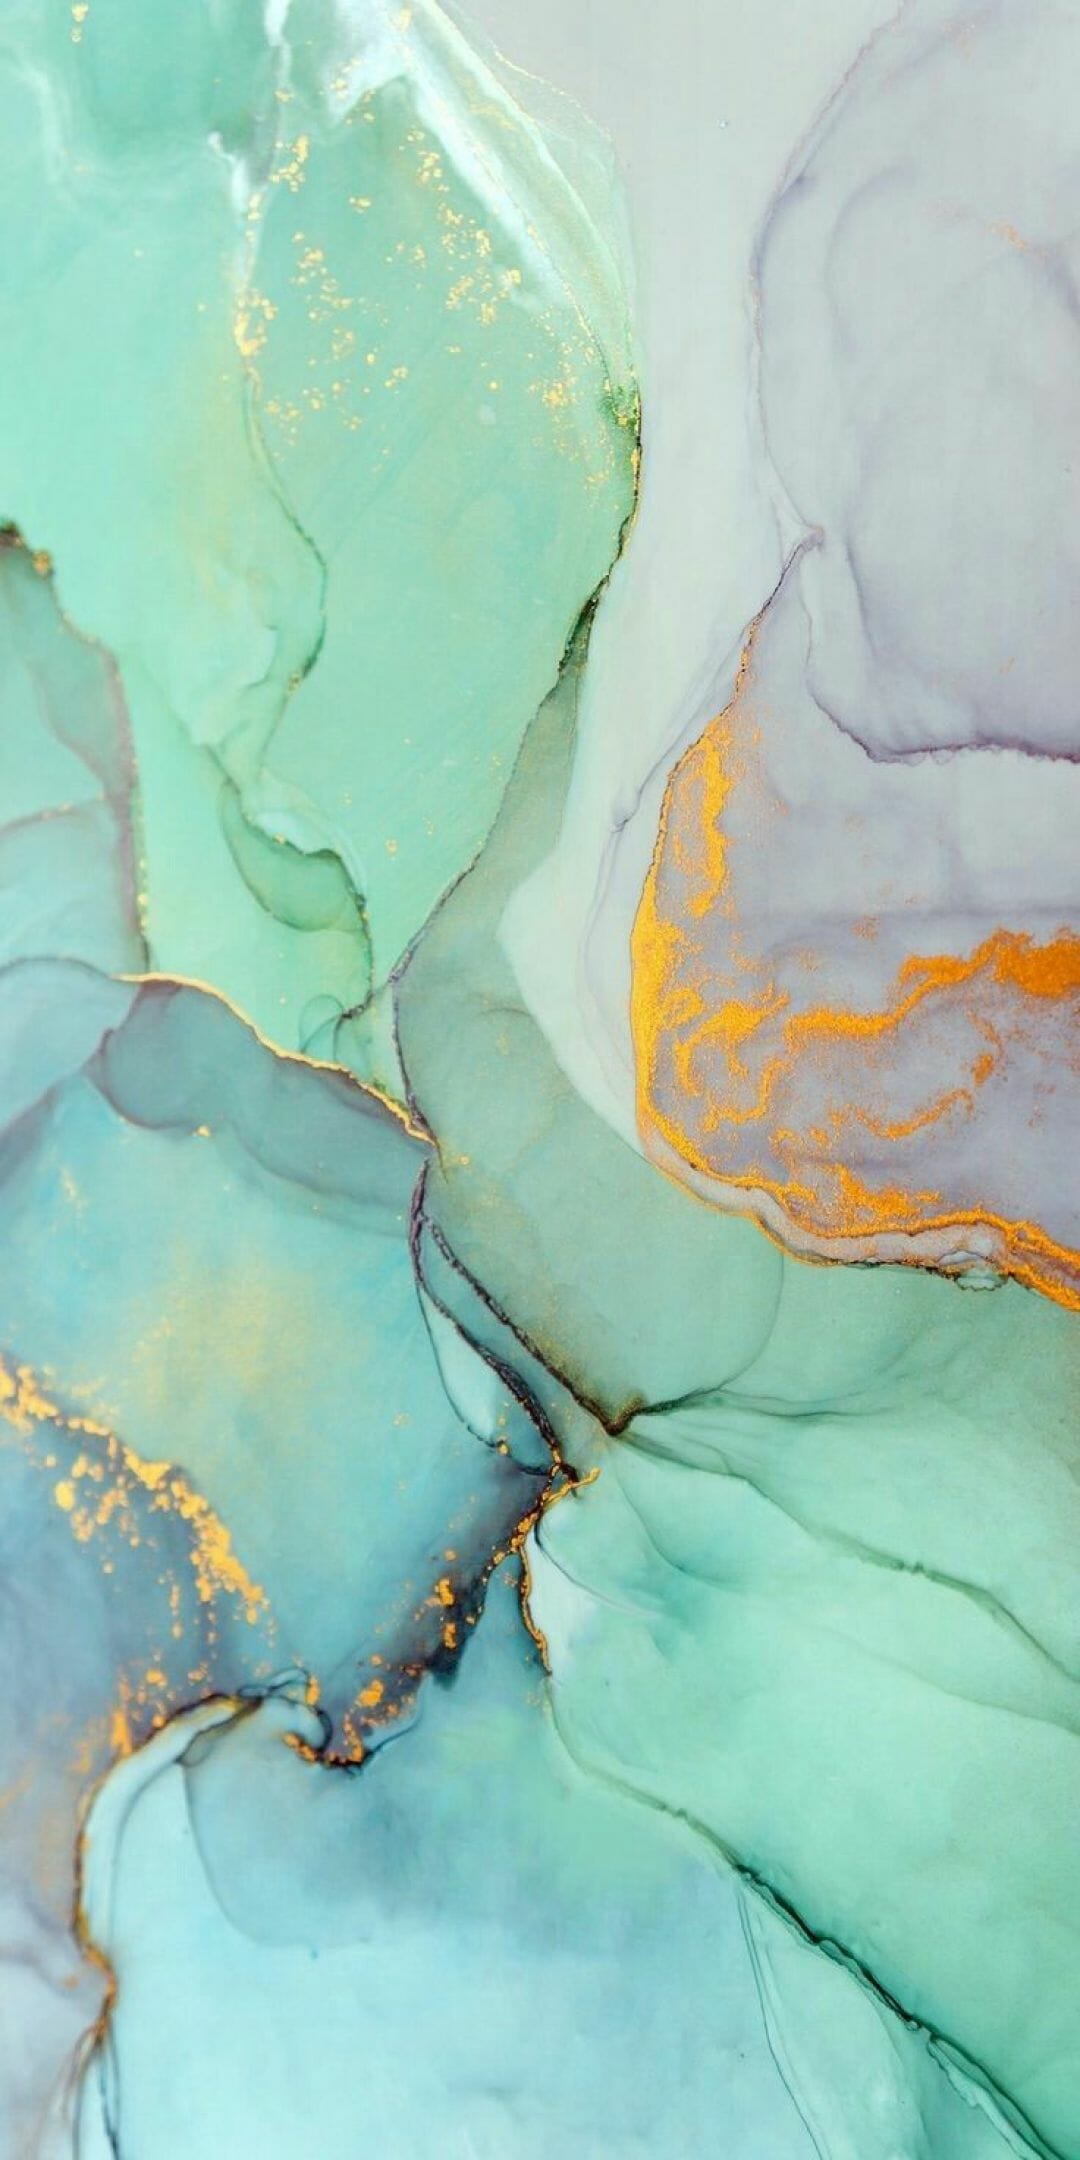 A close up of some blue and green paint - Teal, marble, turquoise, aqua